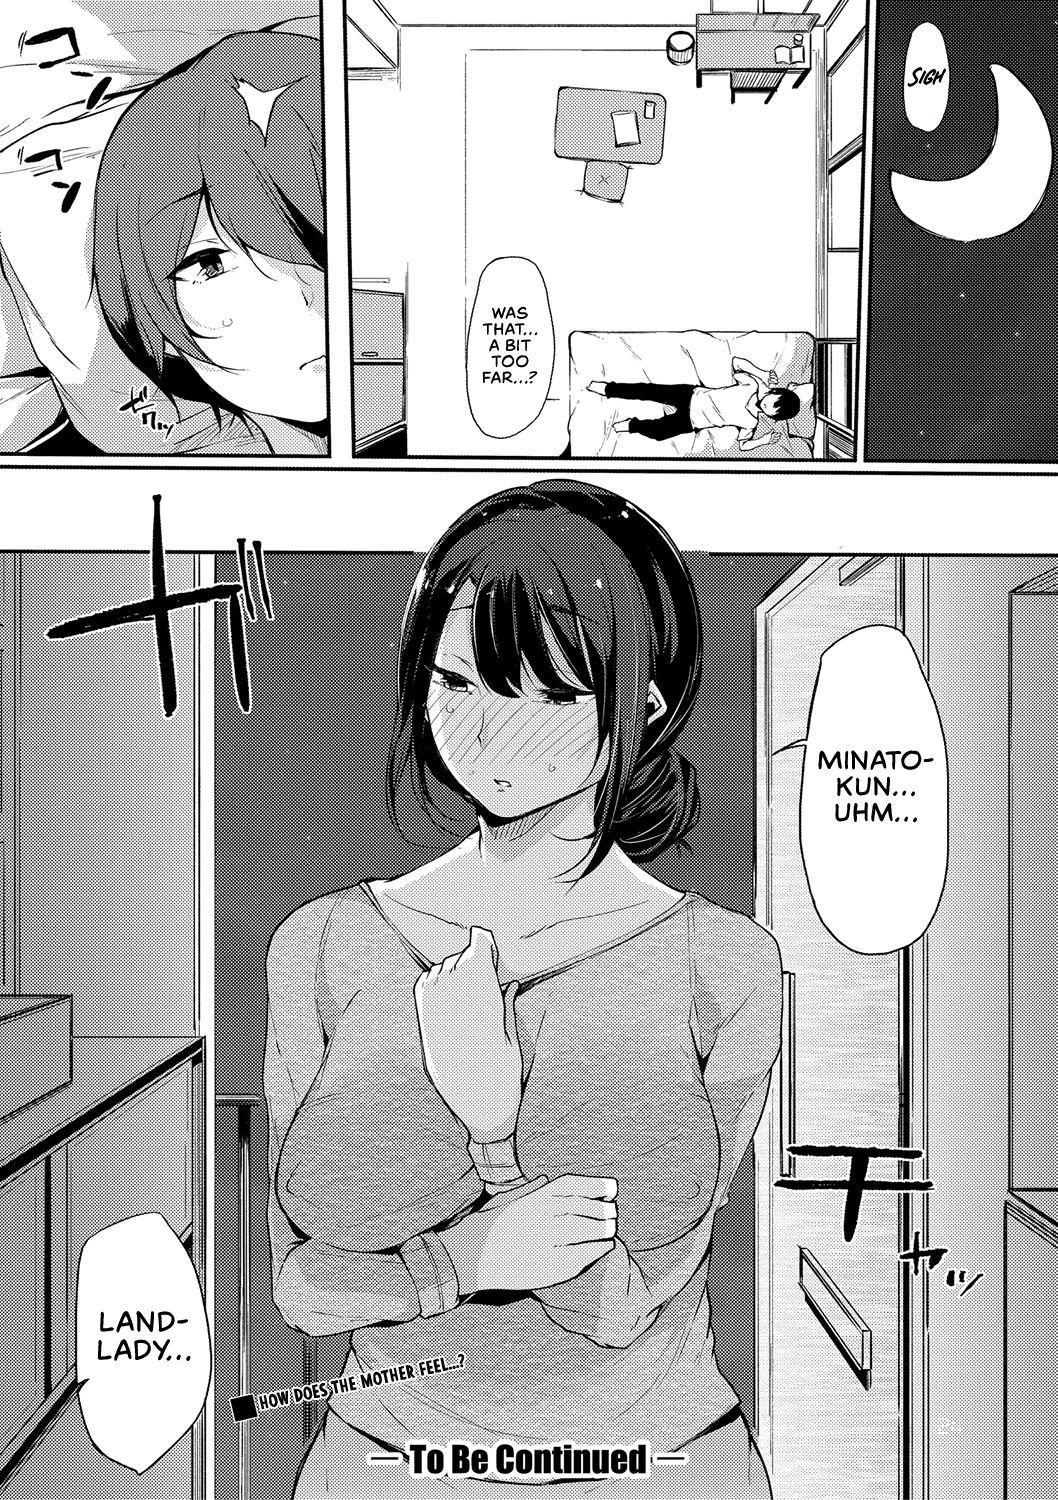 Sex Tape Musume Nochi Haha, Tokoroniyori Shunrai Zenpen | A Daughter followed by a Mother: A spring Full of Thunders. Hardcore - Page 24